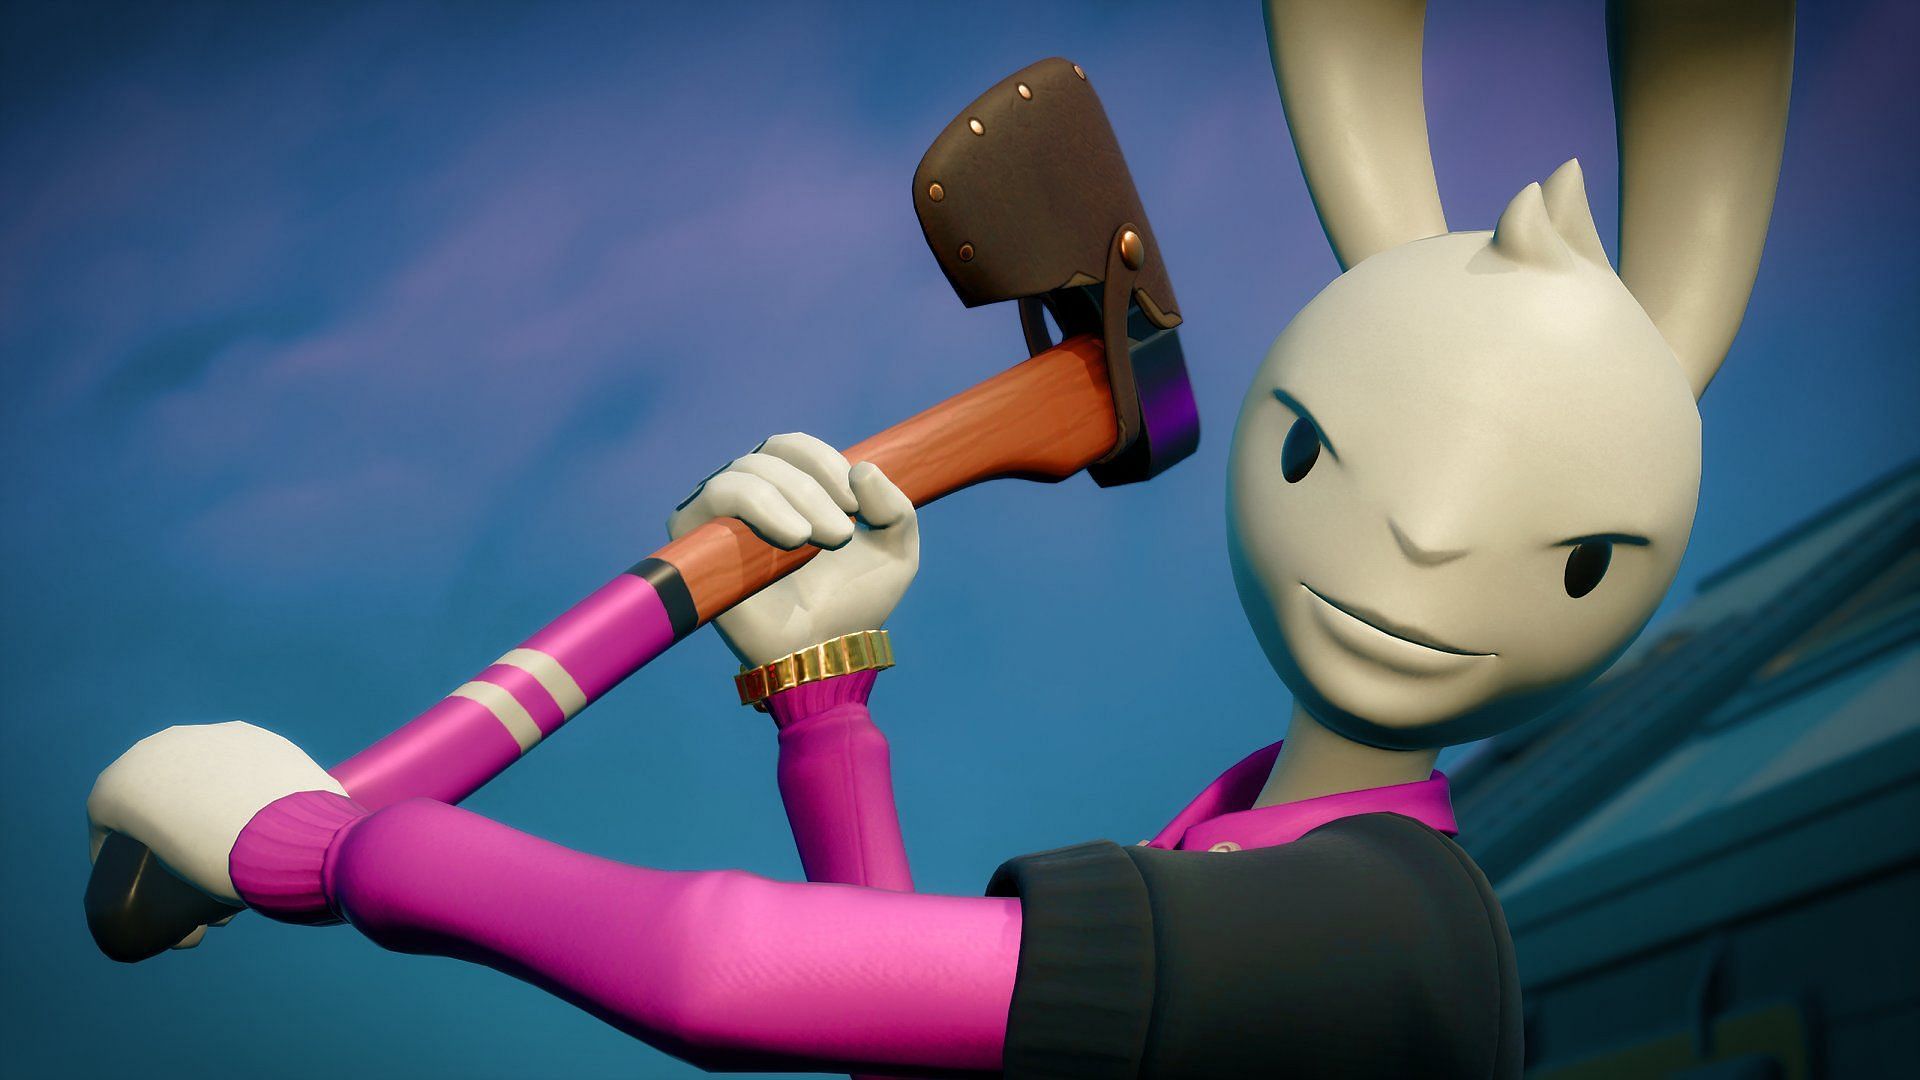 The Throwable Axe may become the weapon of choice in Fortnite Chapter 4 Season 3 (Image via Twitter/AzazelEv)